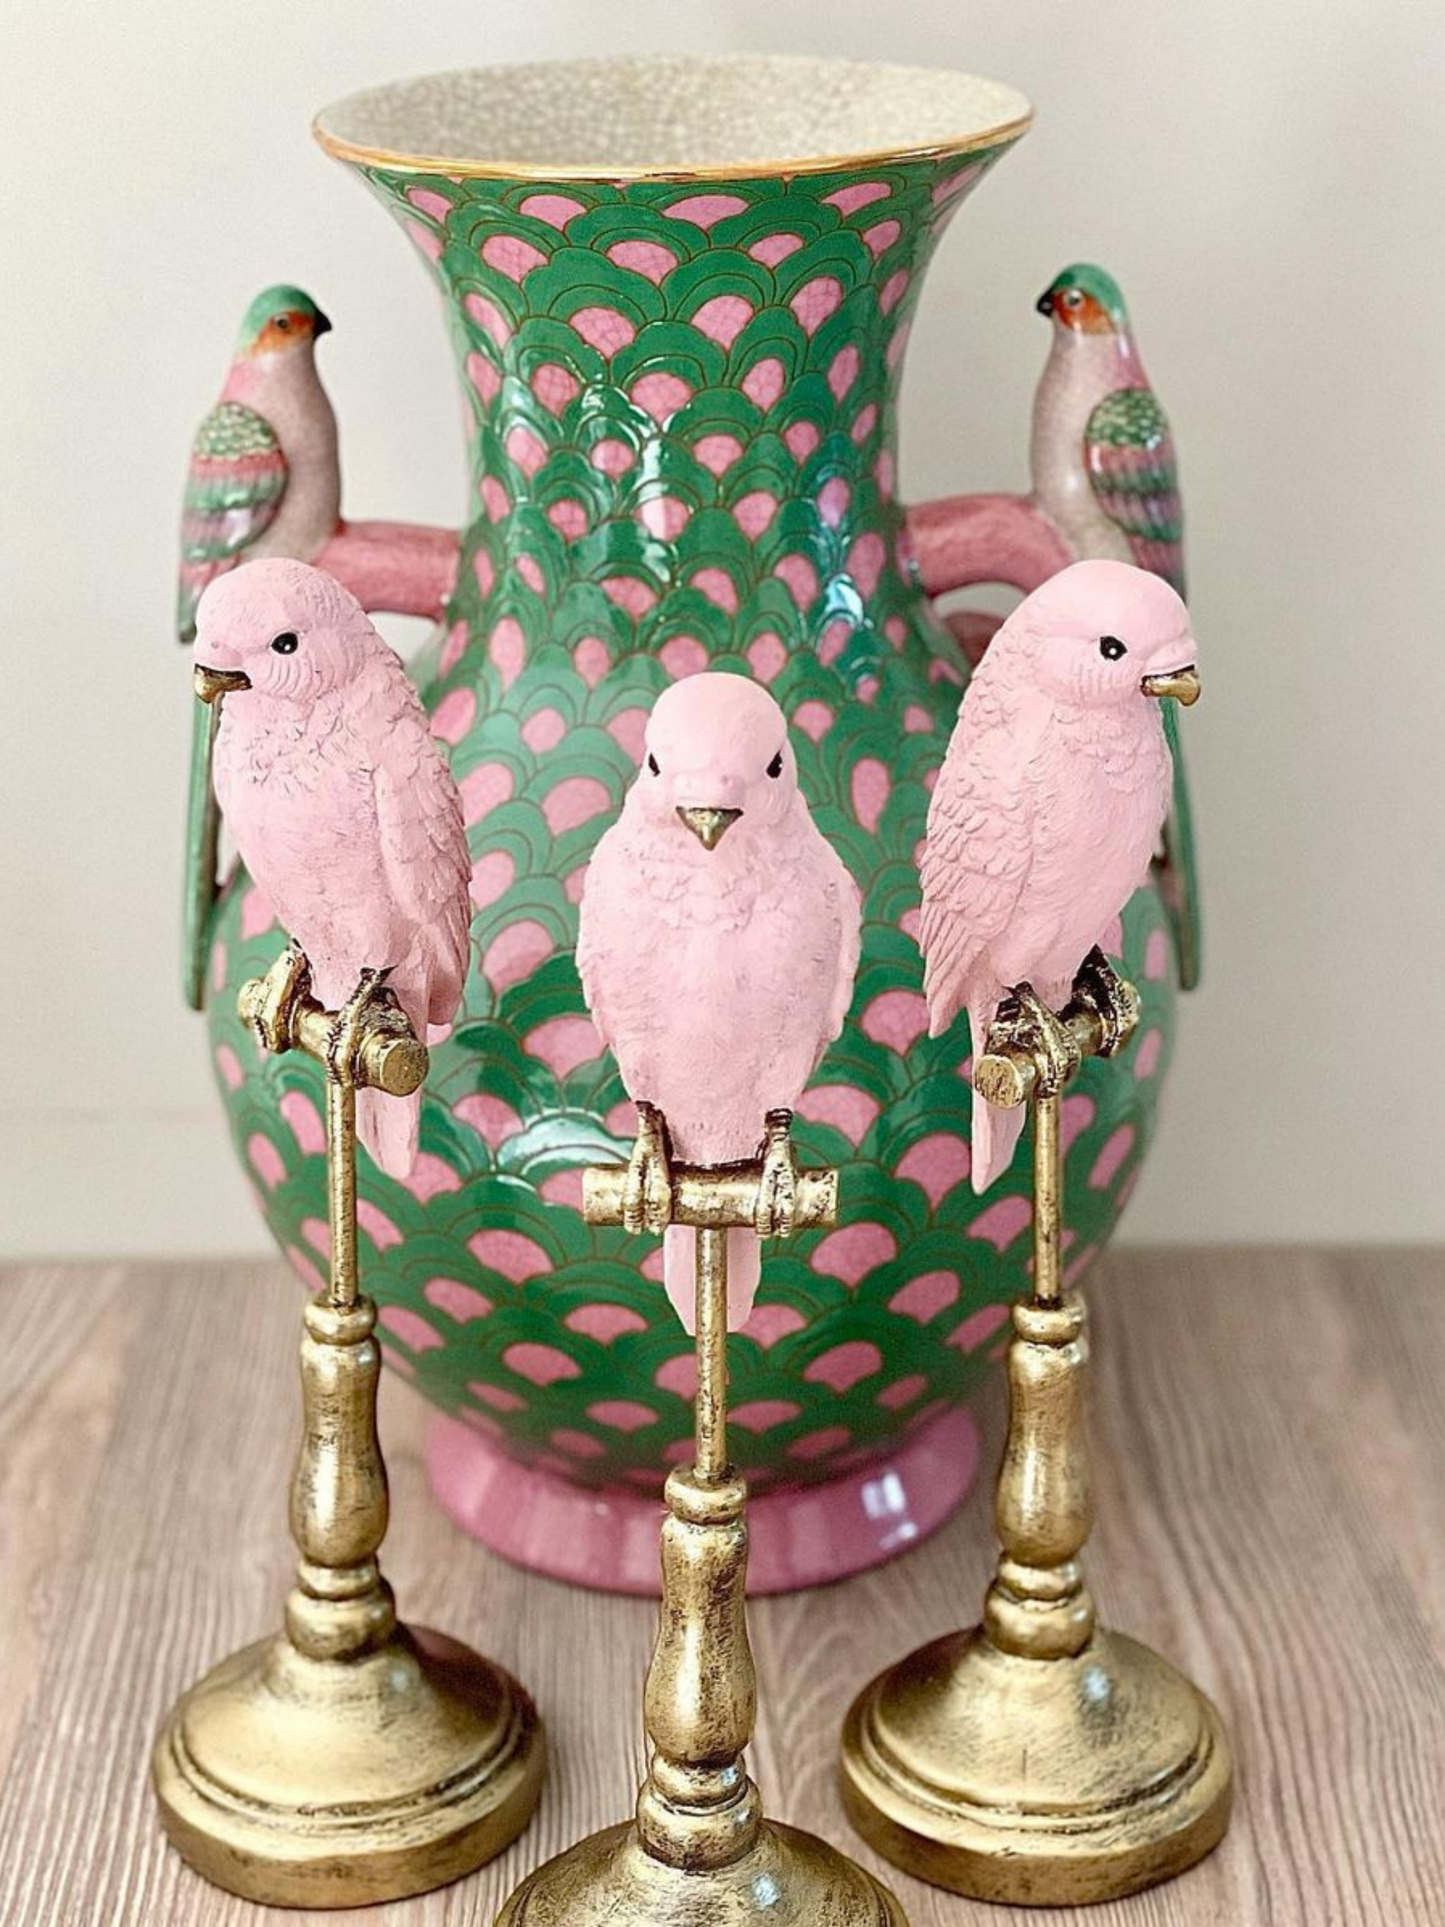 Isla Pink and Green Print Bird Sculpture Porcelain Vase by C.A.M